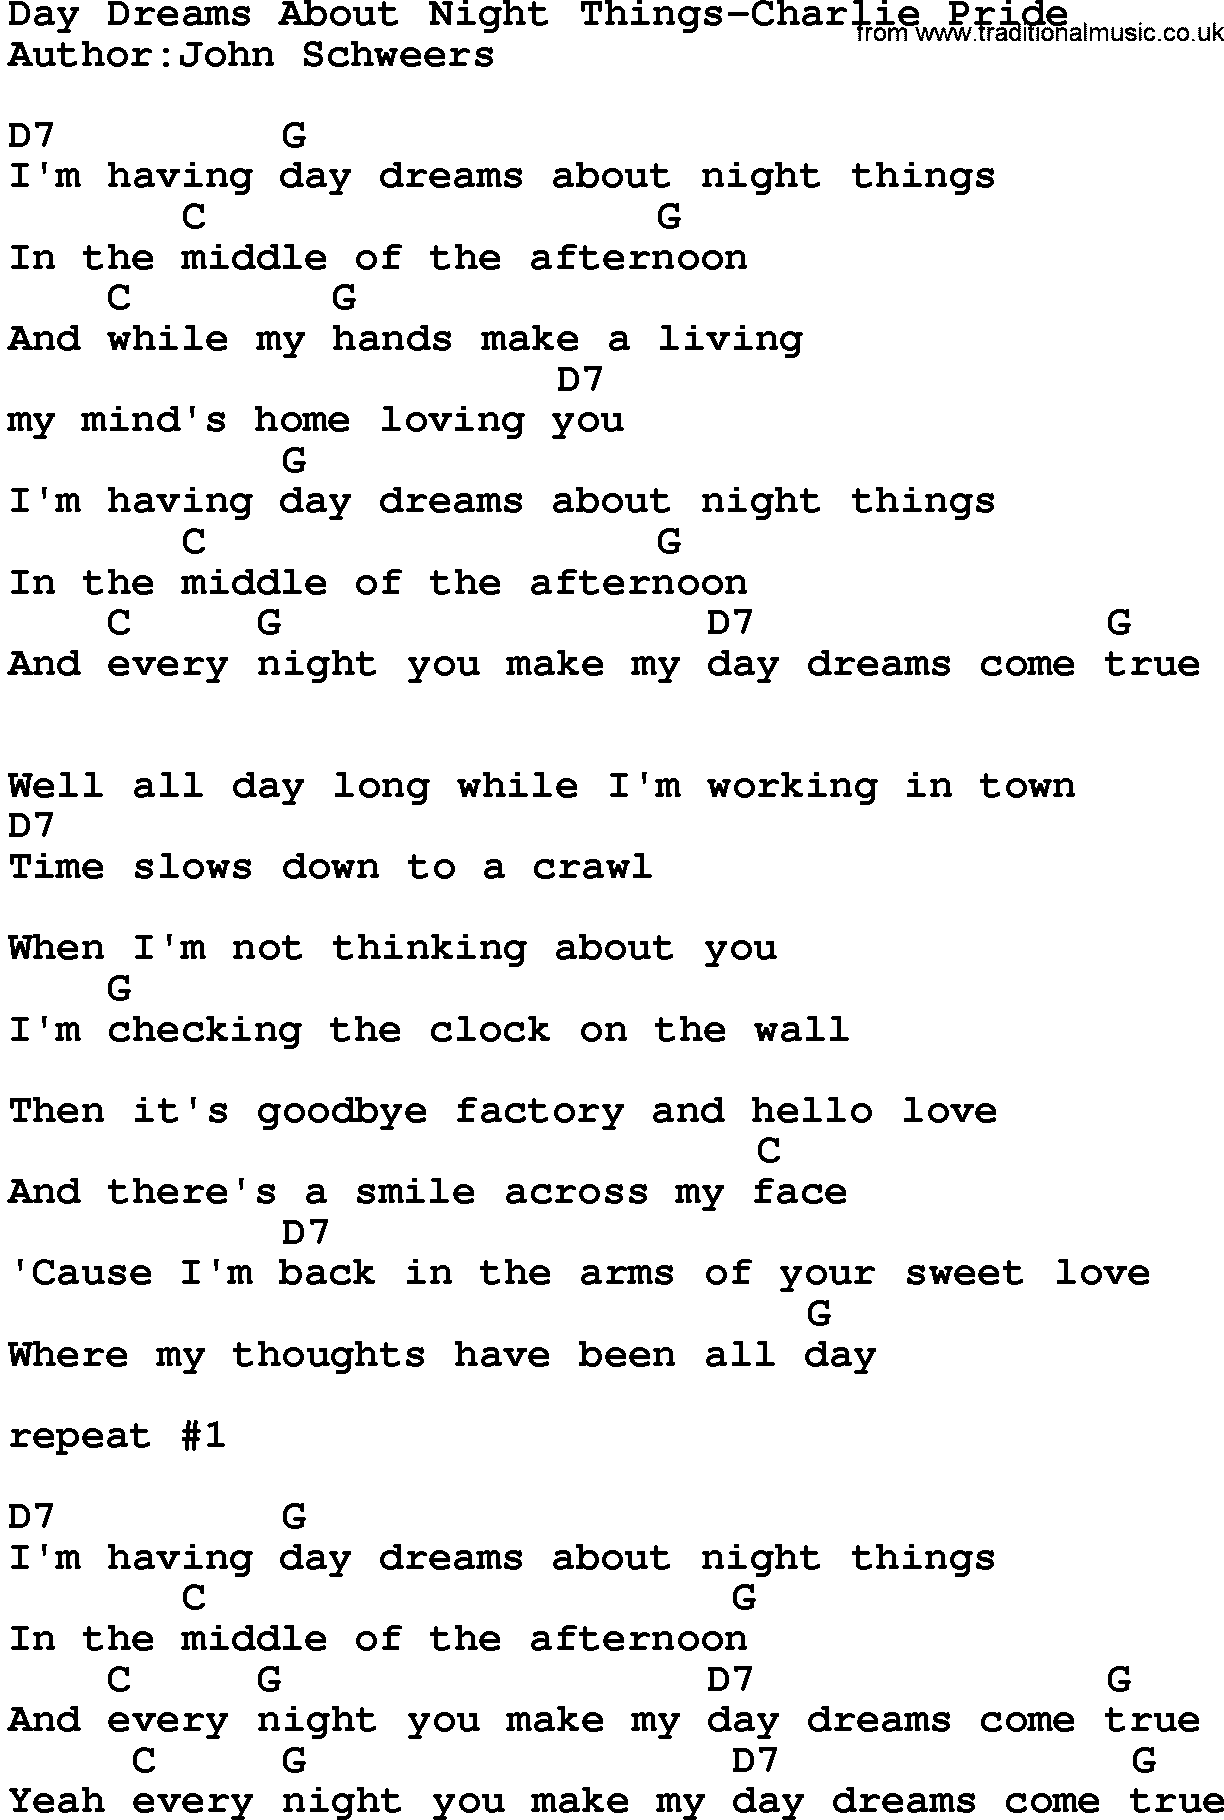 Country music song: Day Dreams About Night Things-Charlie Pride lyrics and chords